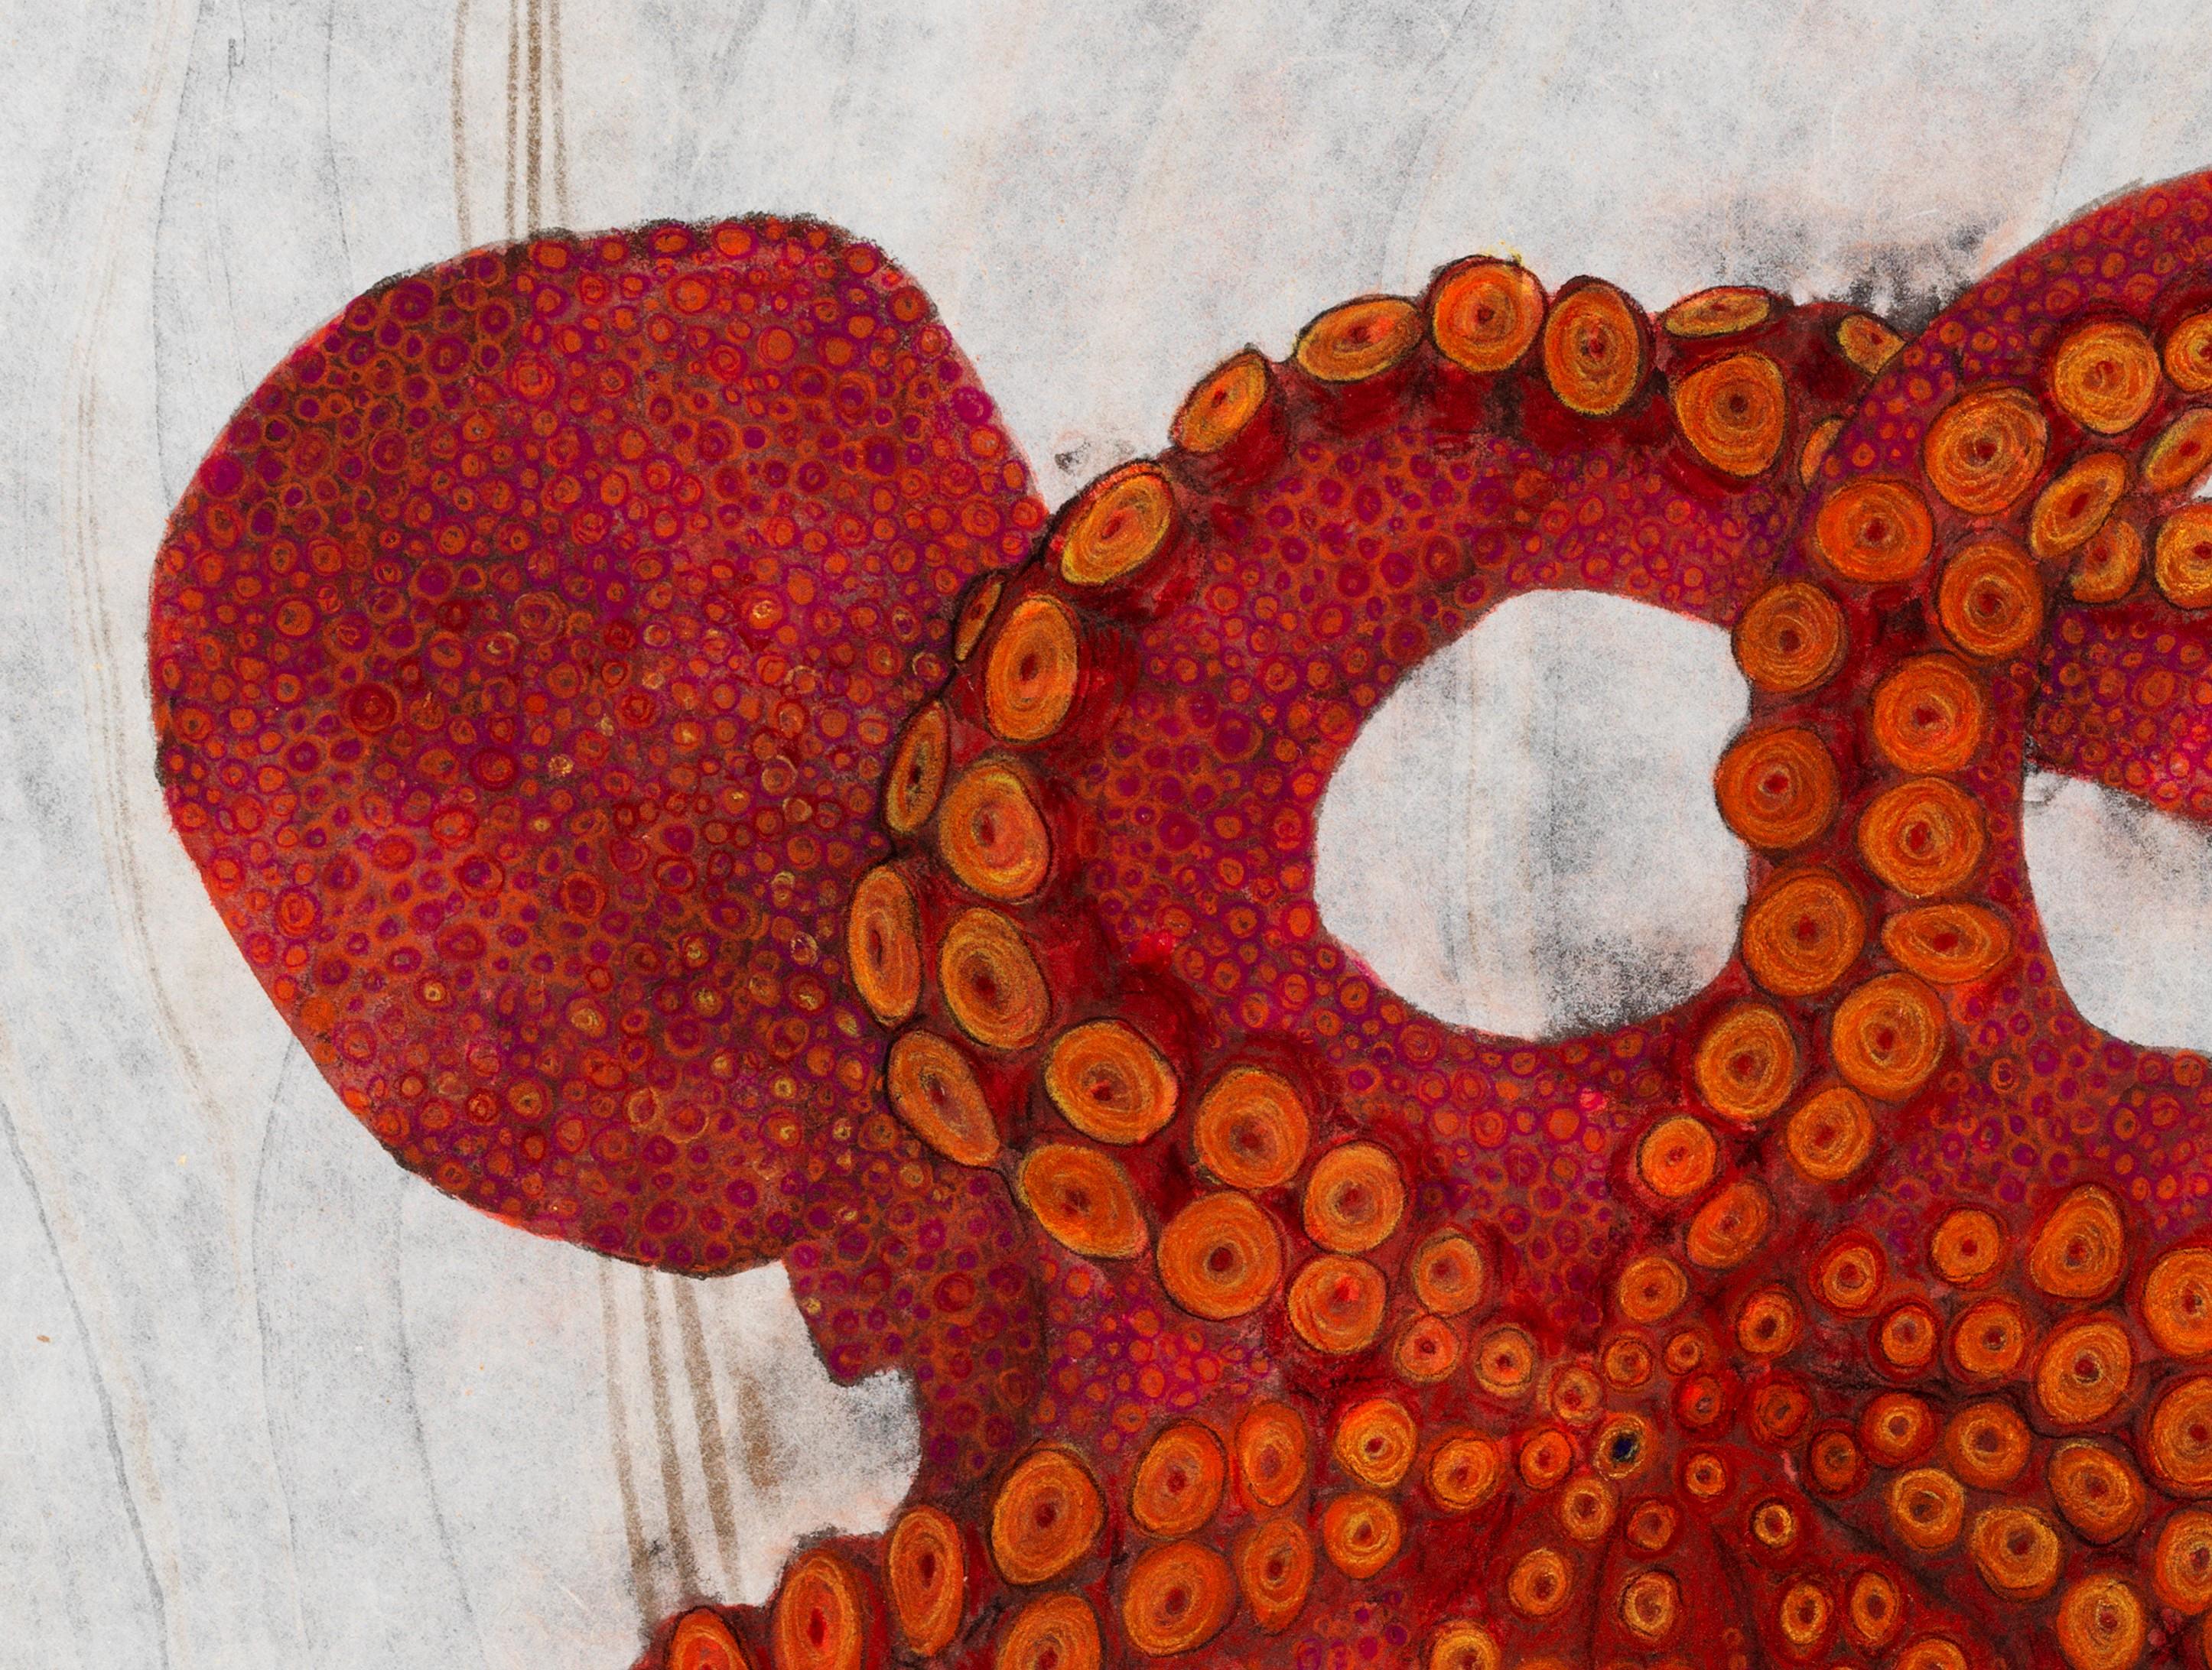 Red Retreats - Gyo-Tako Style Japanese Sumi Ink Print of a Large Octopus - Art by Jeff Conroy